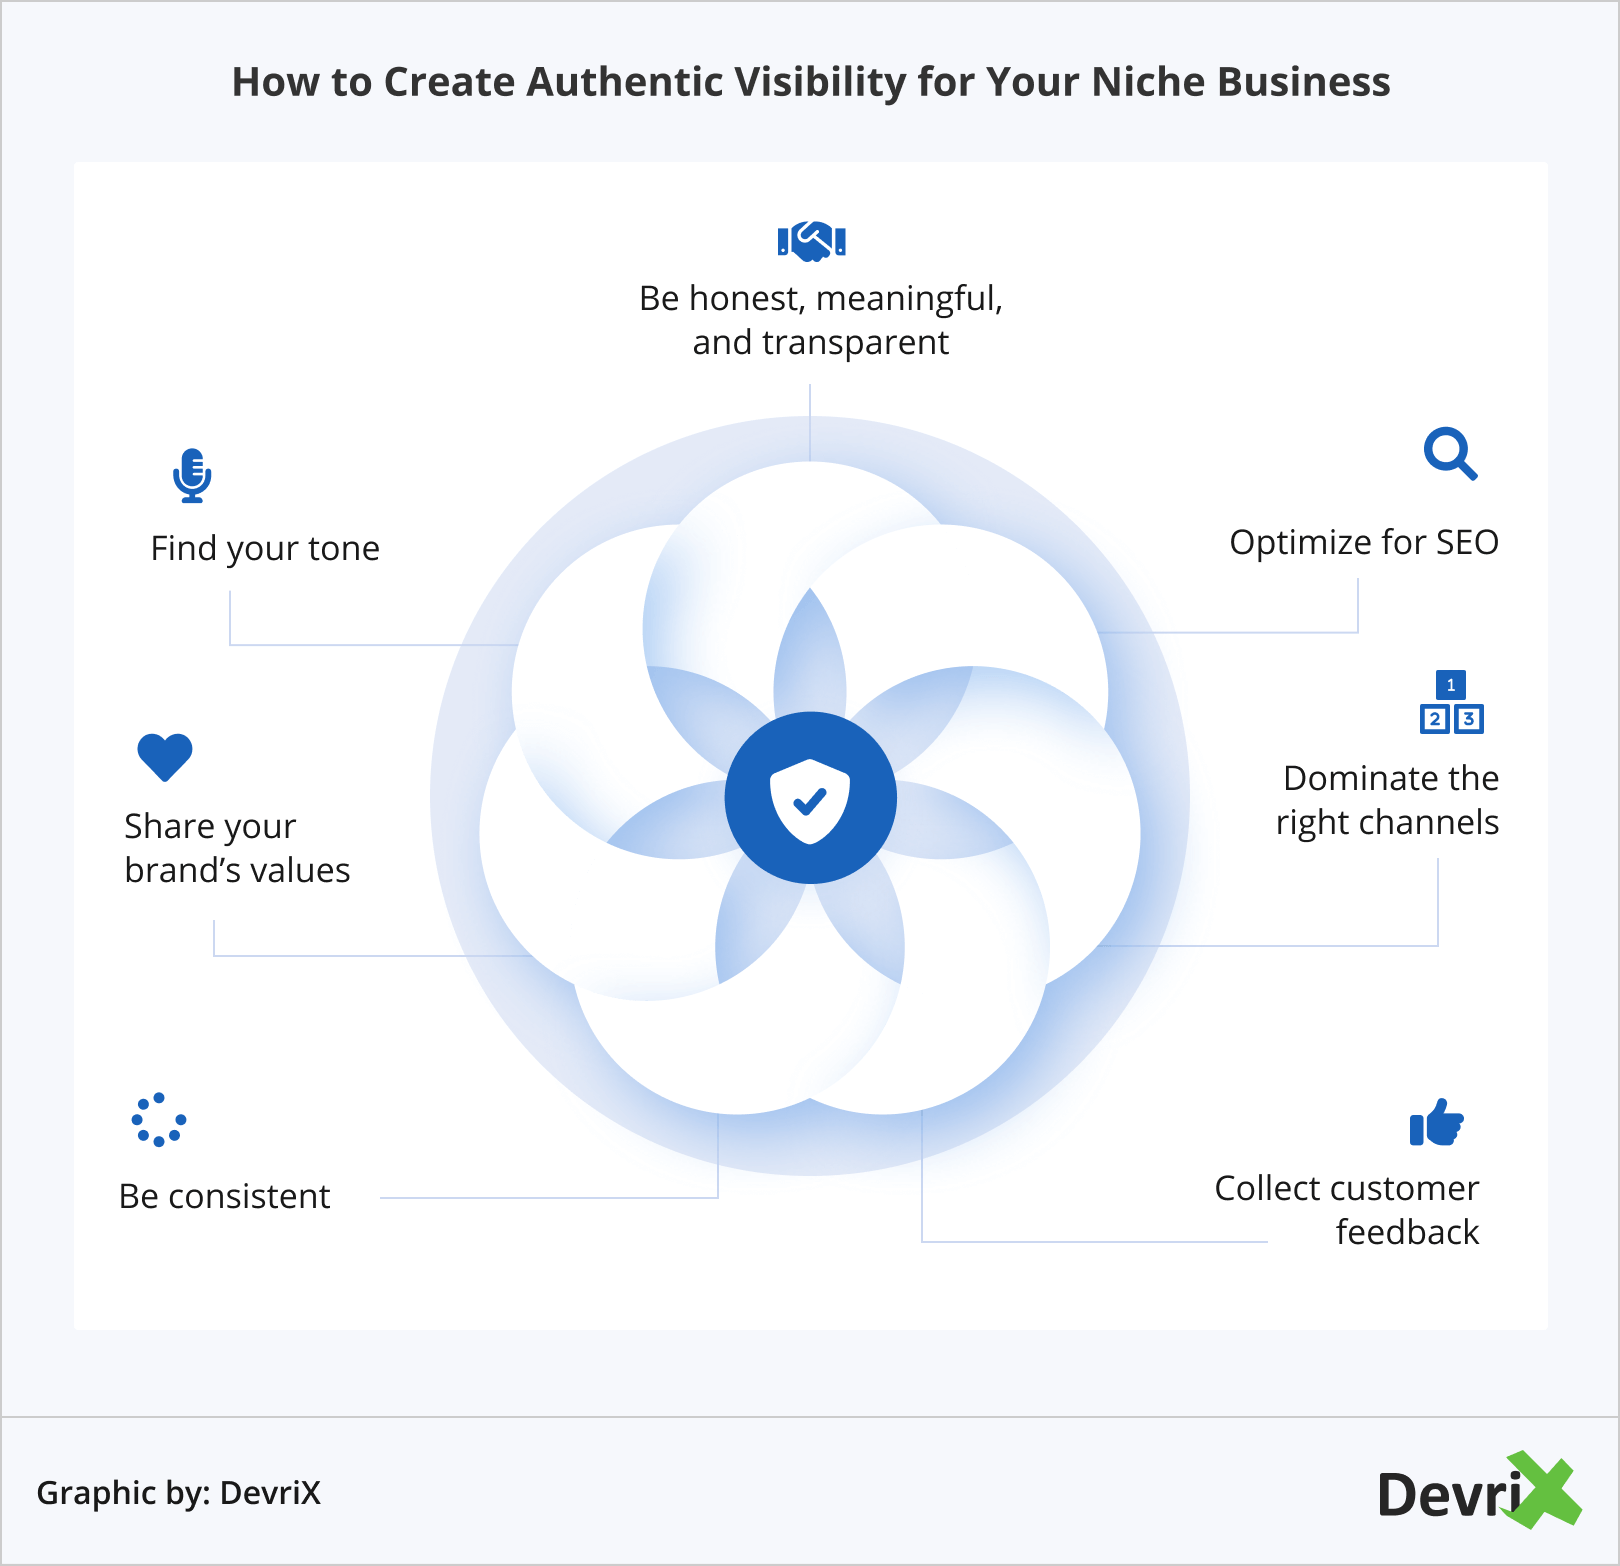 How to Create Authentic Visibility for Your Niche Business